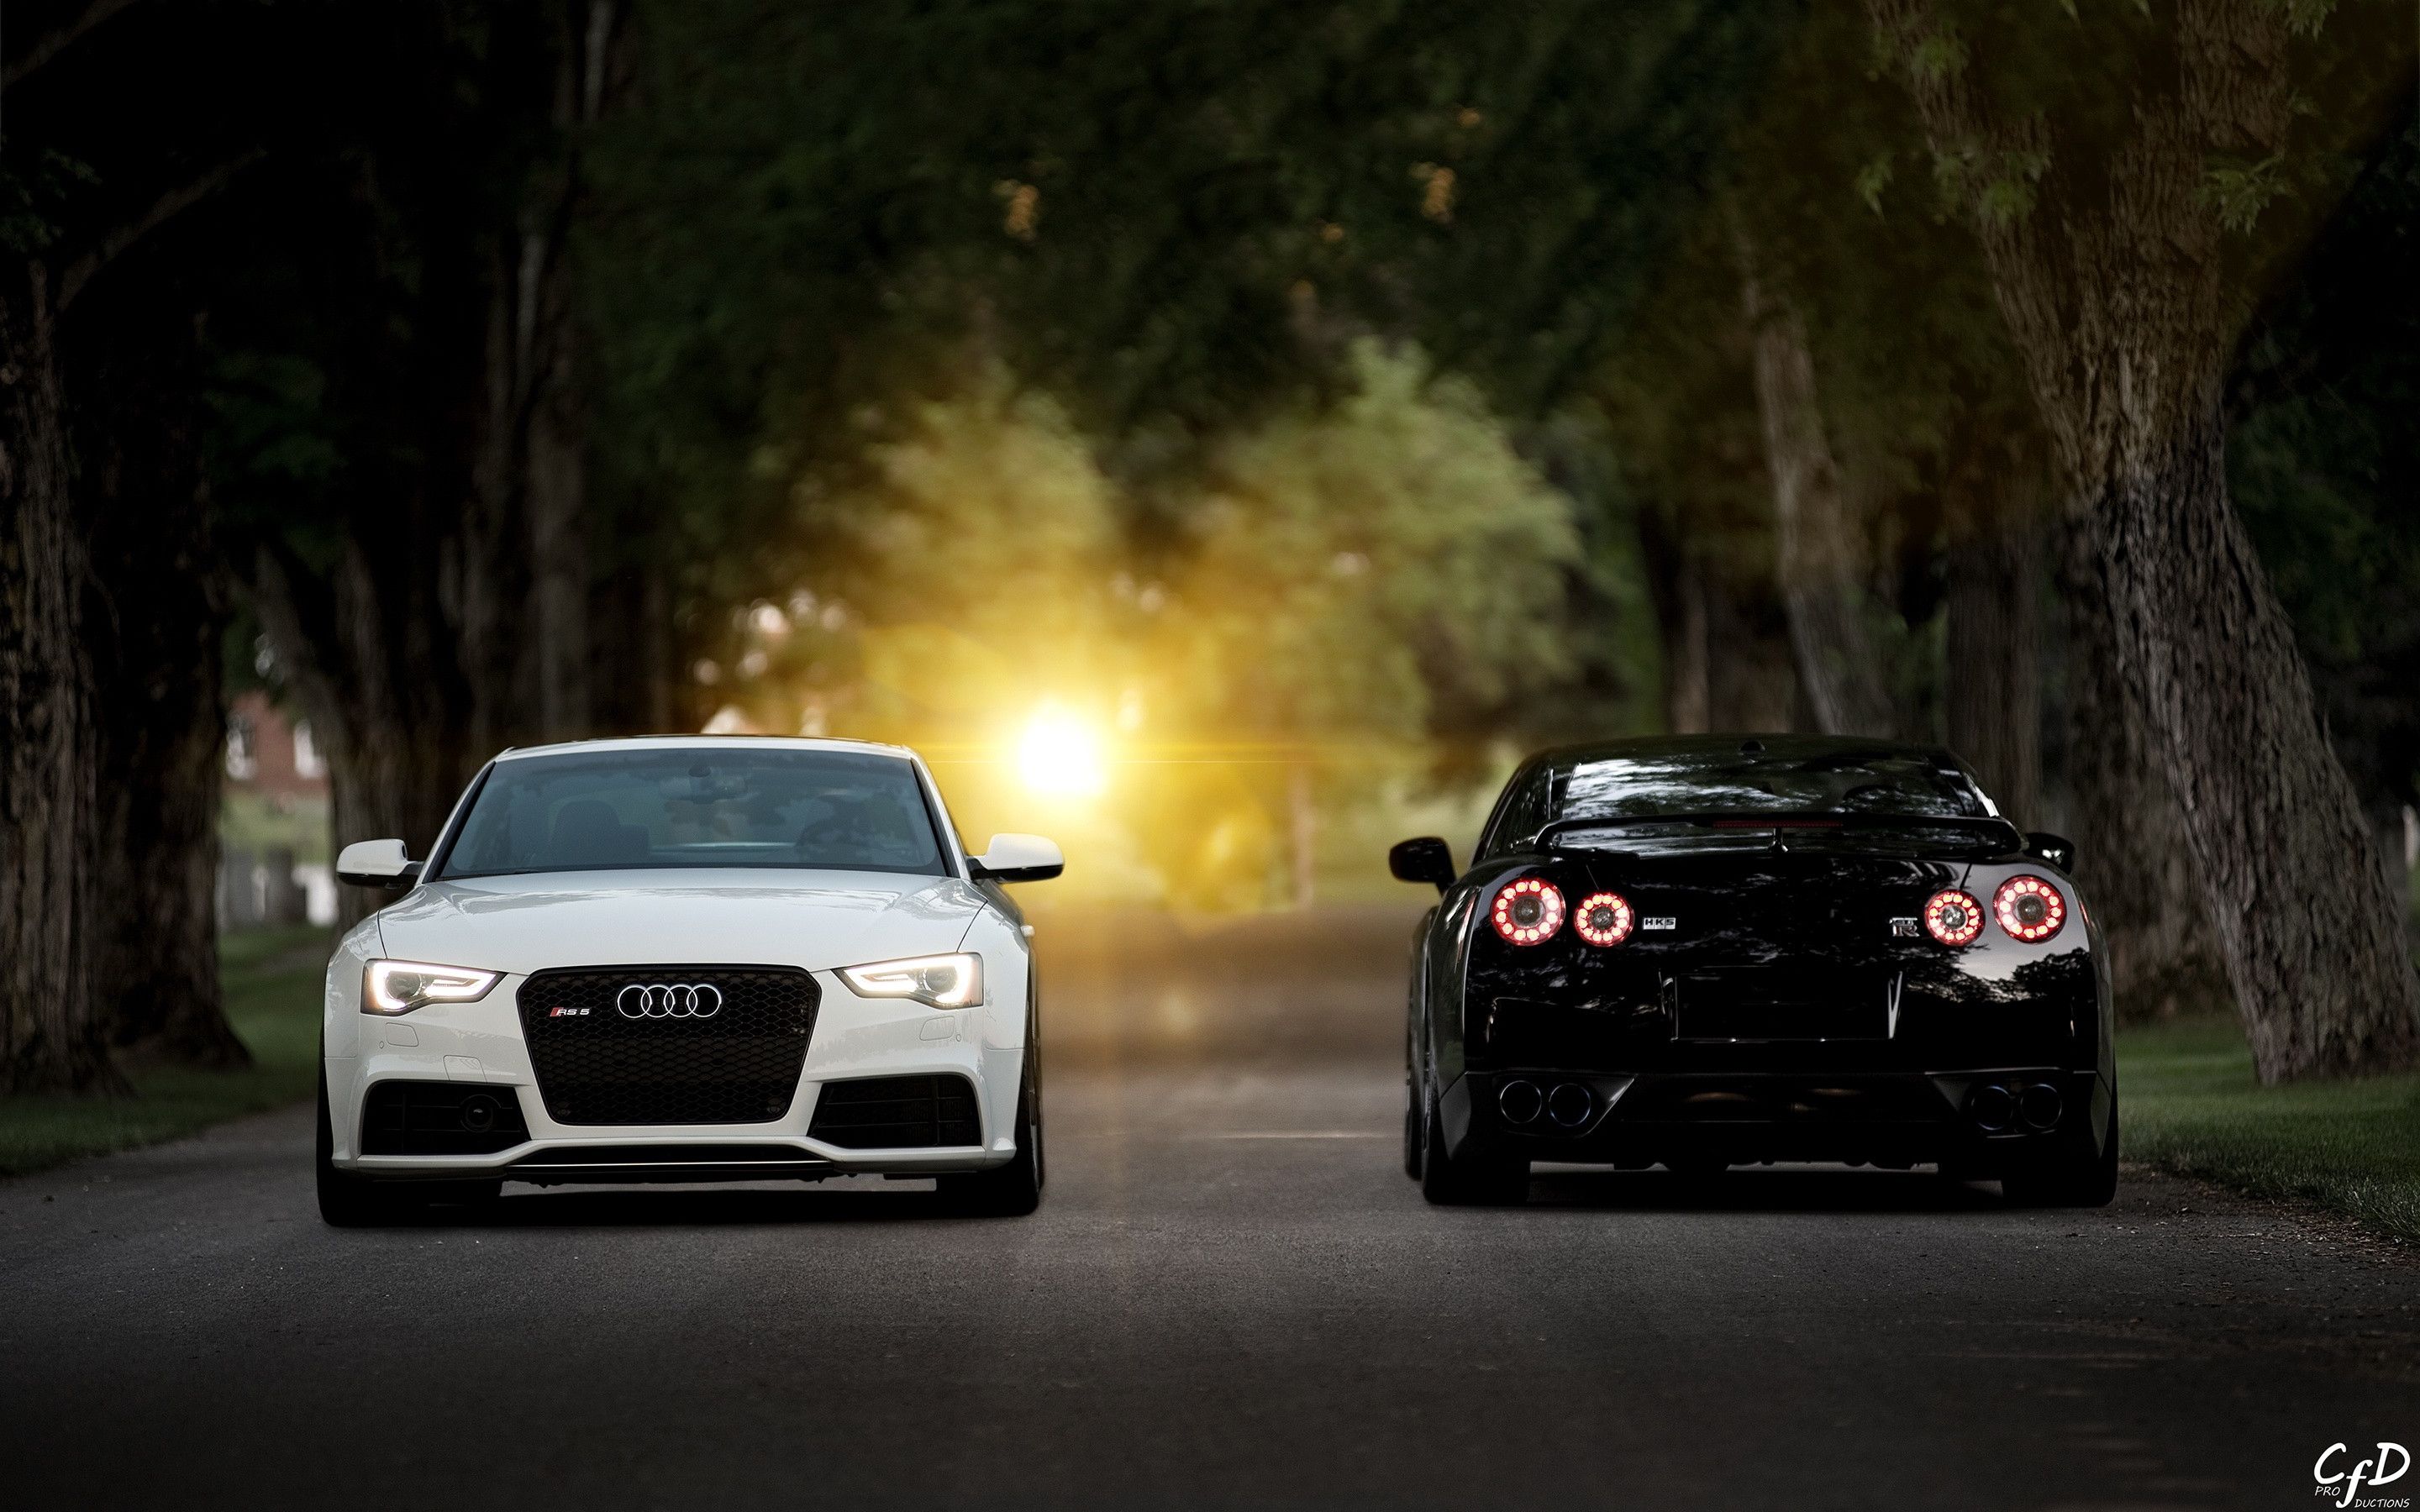 Nissan Gt R Wallpapers, Hd Images Nissan Gt R Collection, - Nissan Gtr Full Hd - HD Wallpaper 